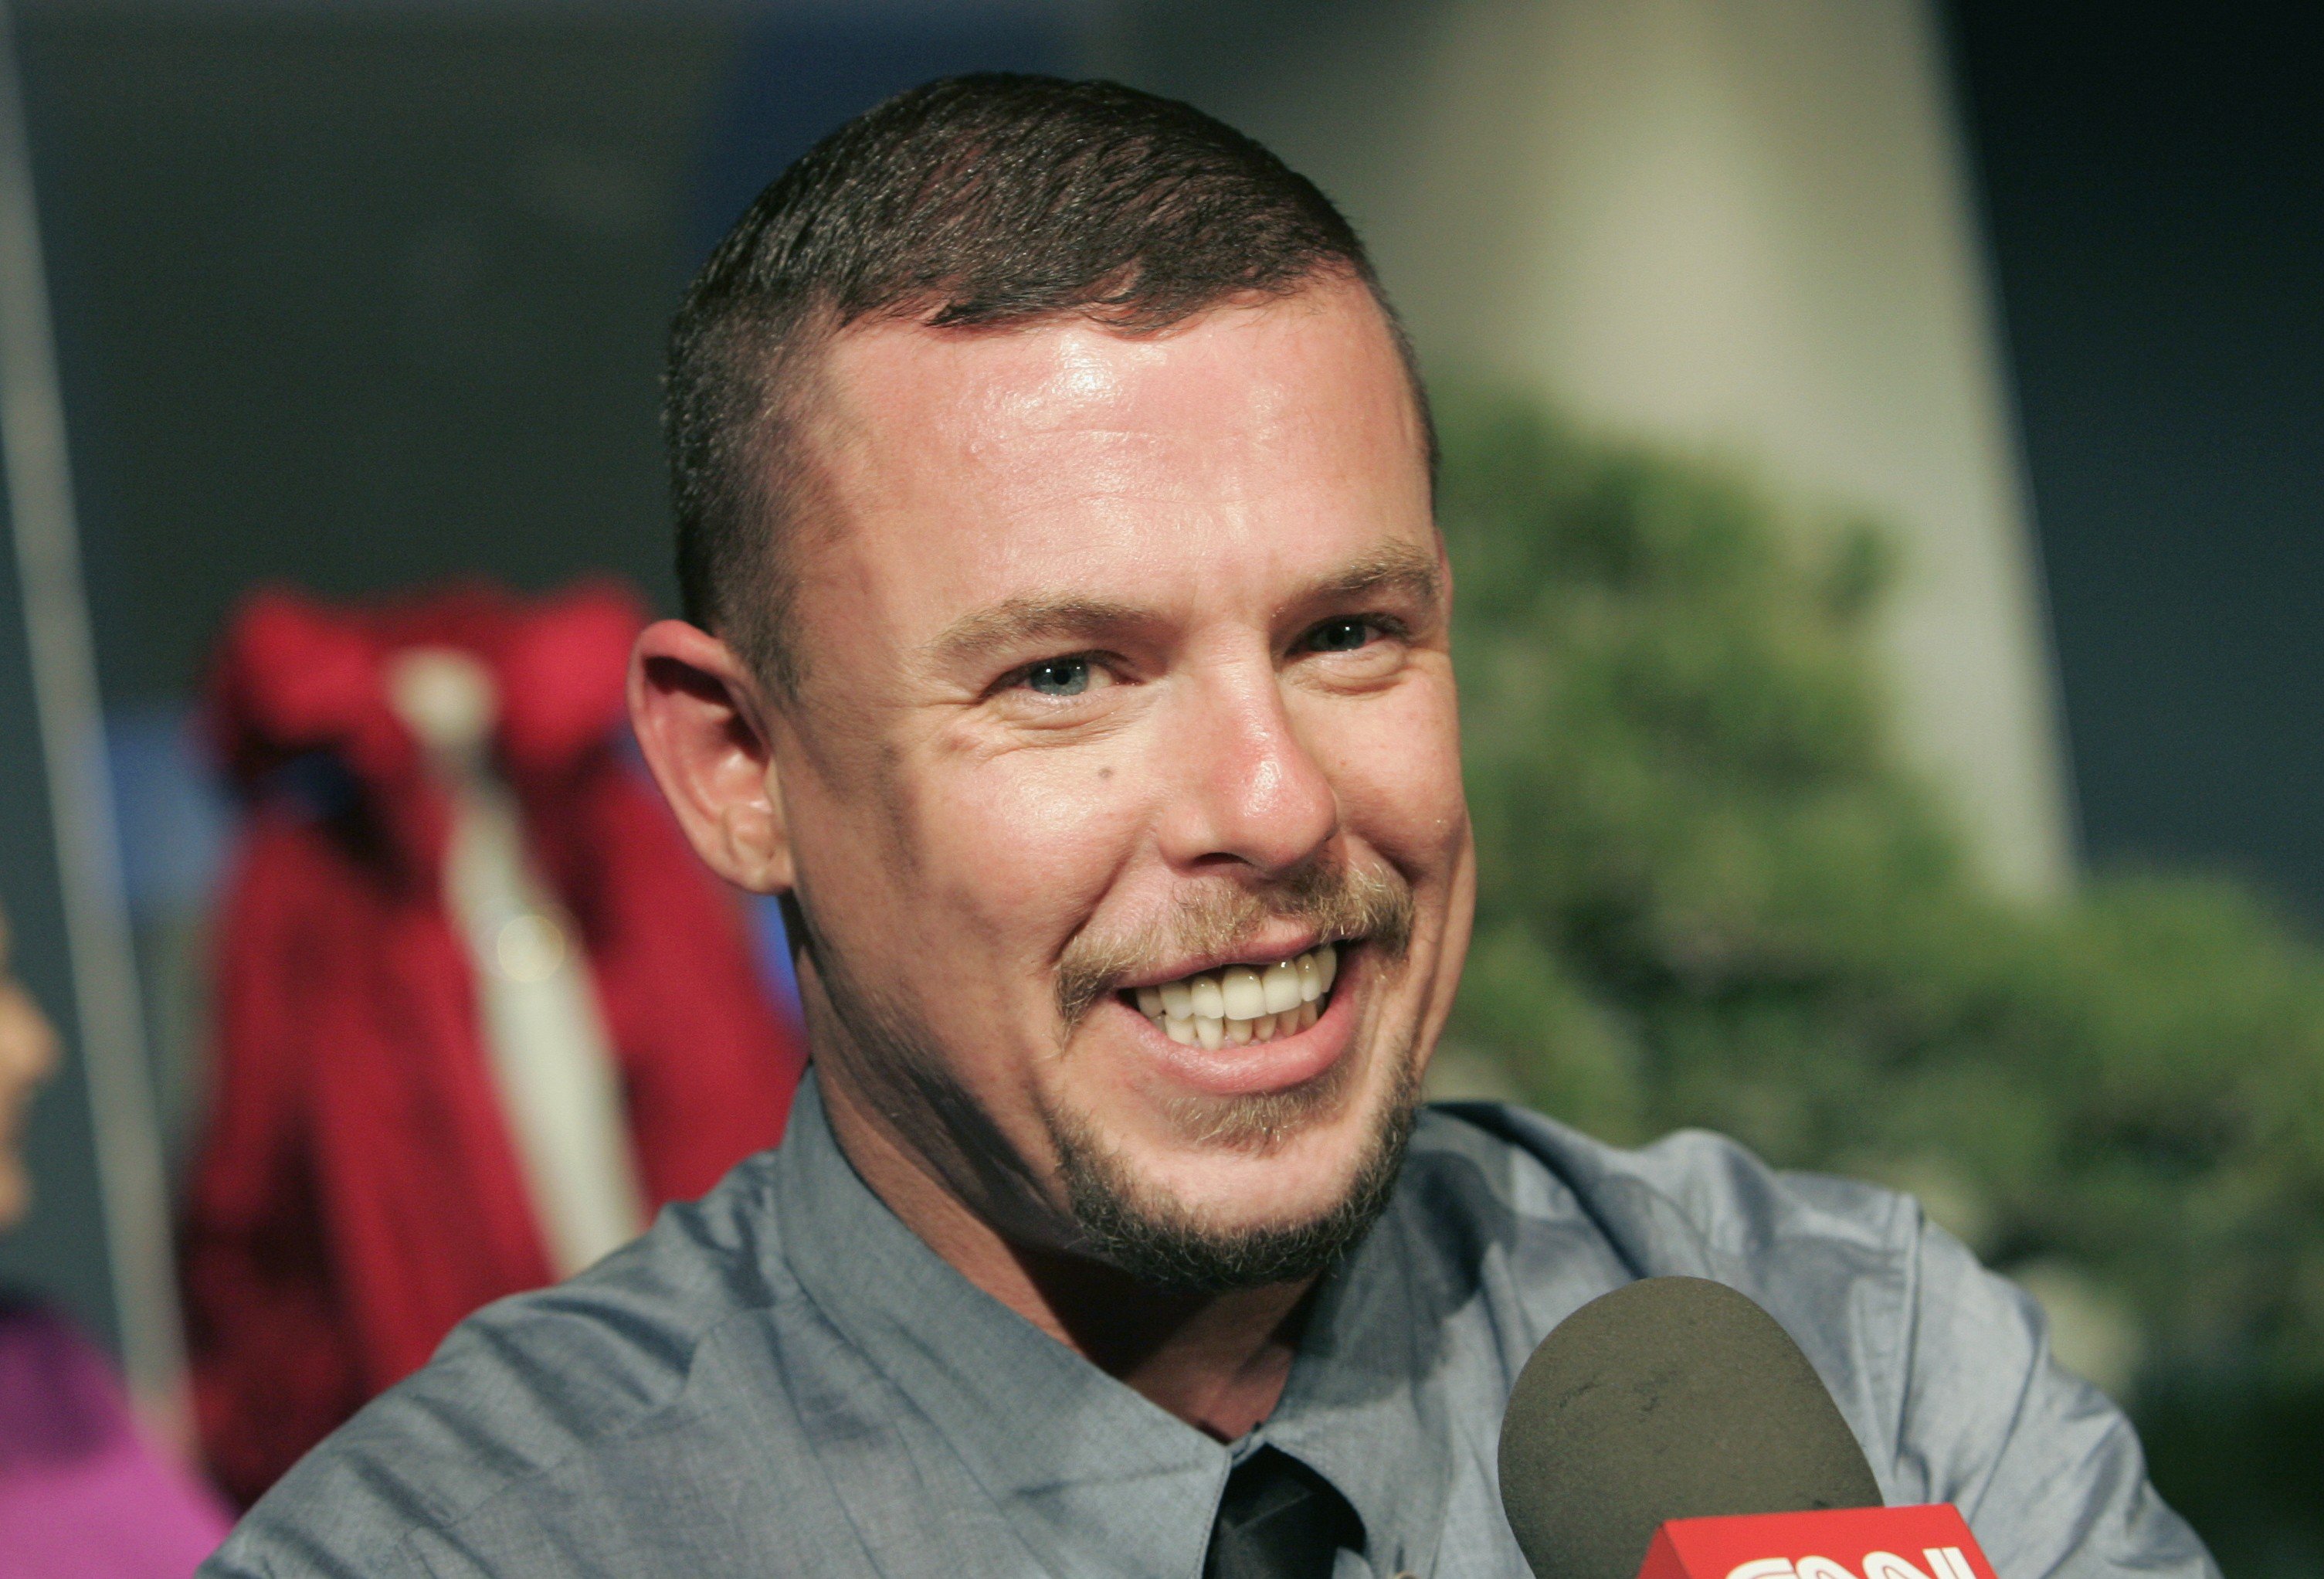 Alexander McQueen's Death Hits Close to Home - Better Chicago